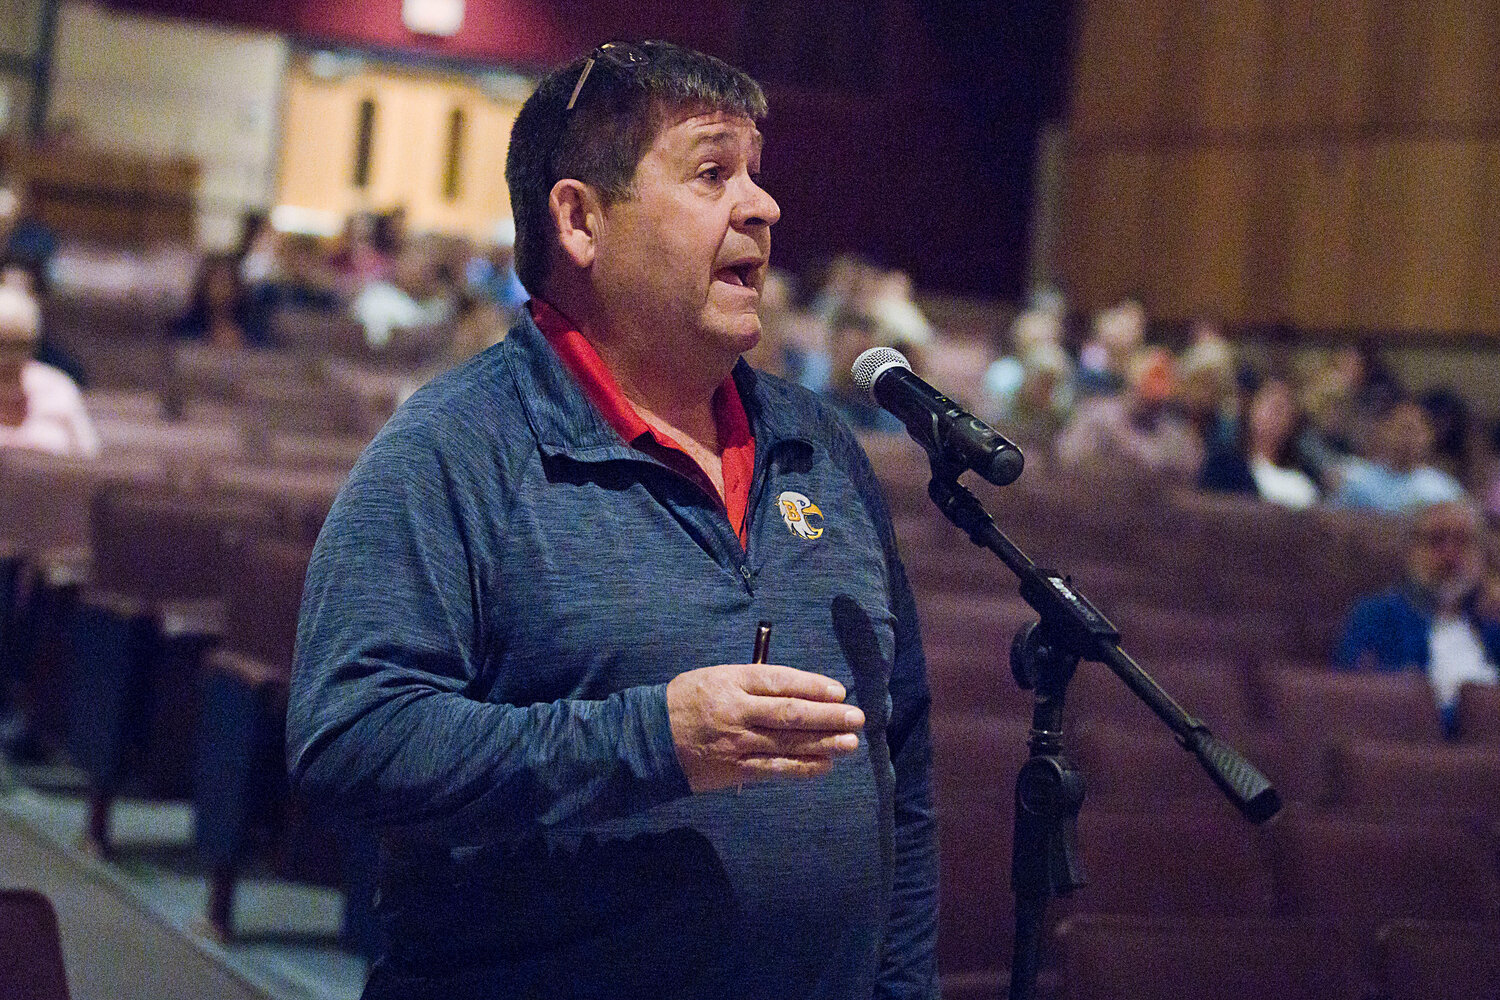 Thomas “TR” Rimoshytus said residents wanted to see more teachers hired, not more administrators.